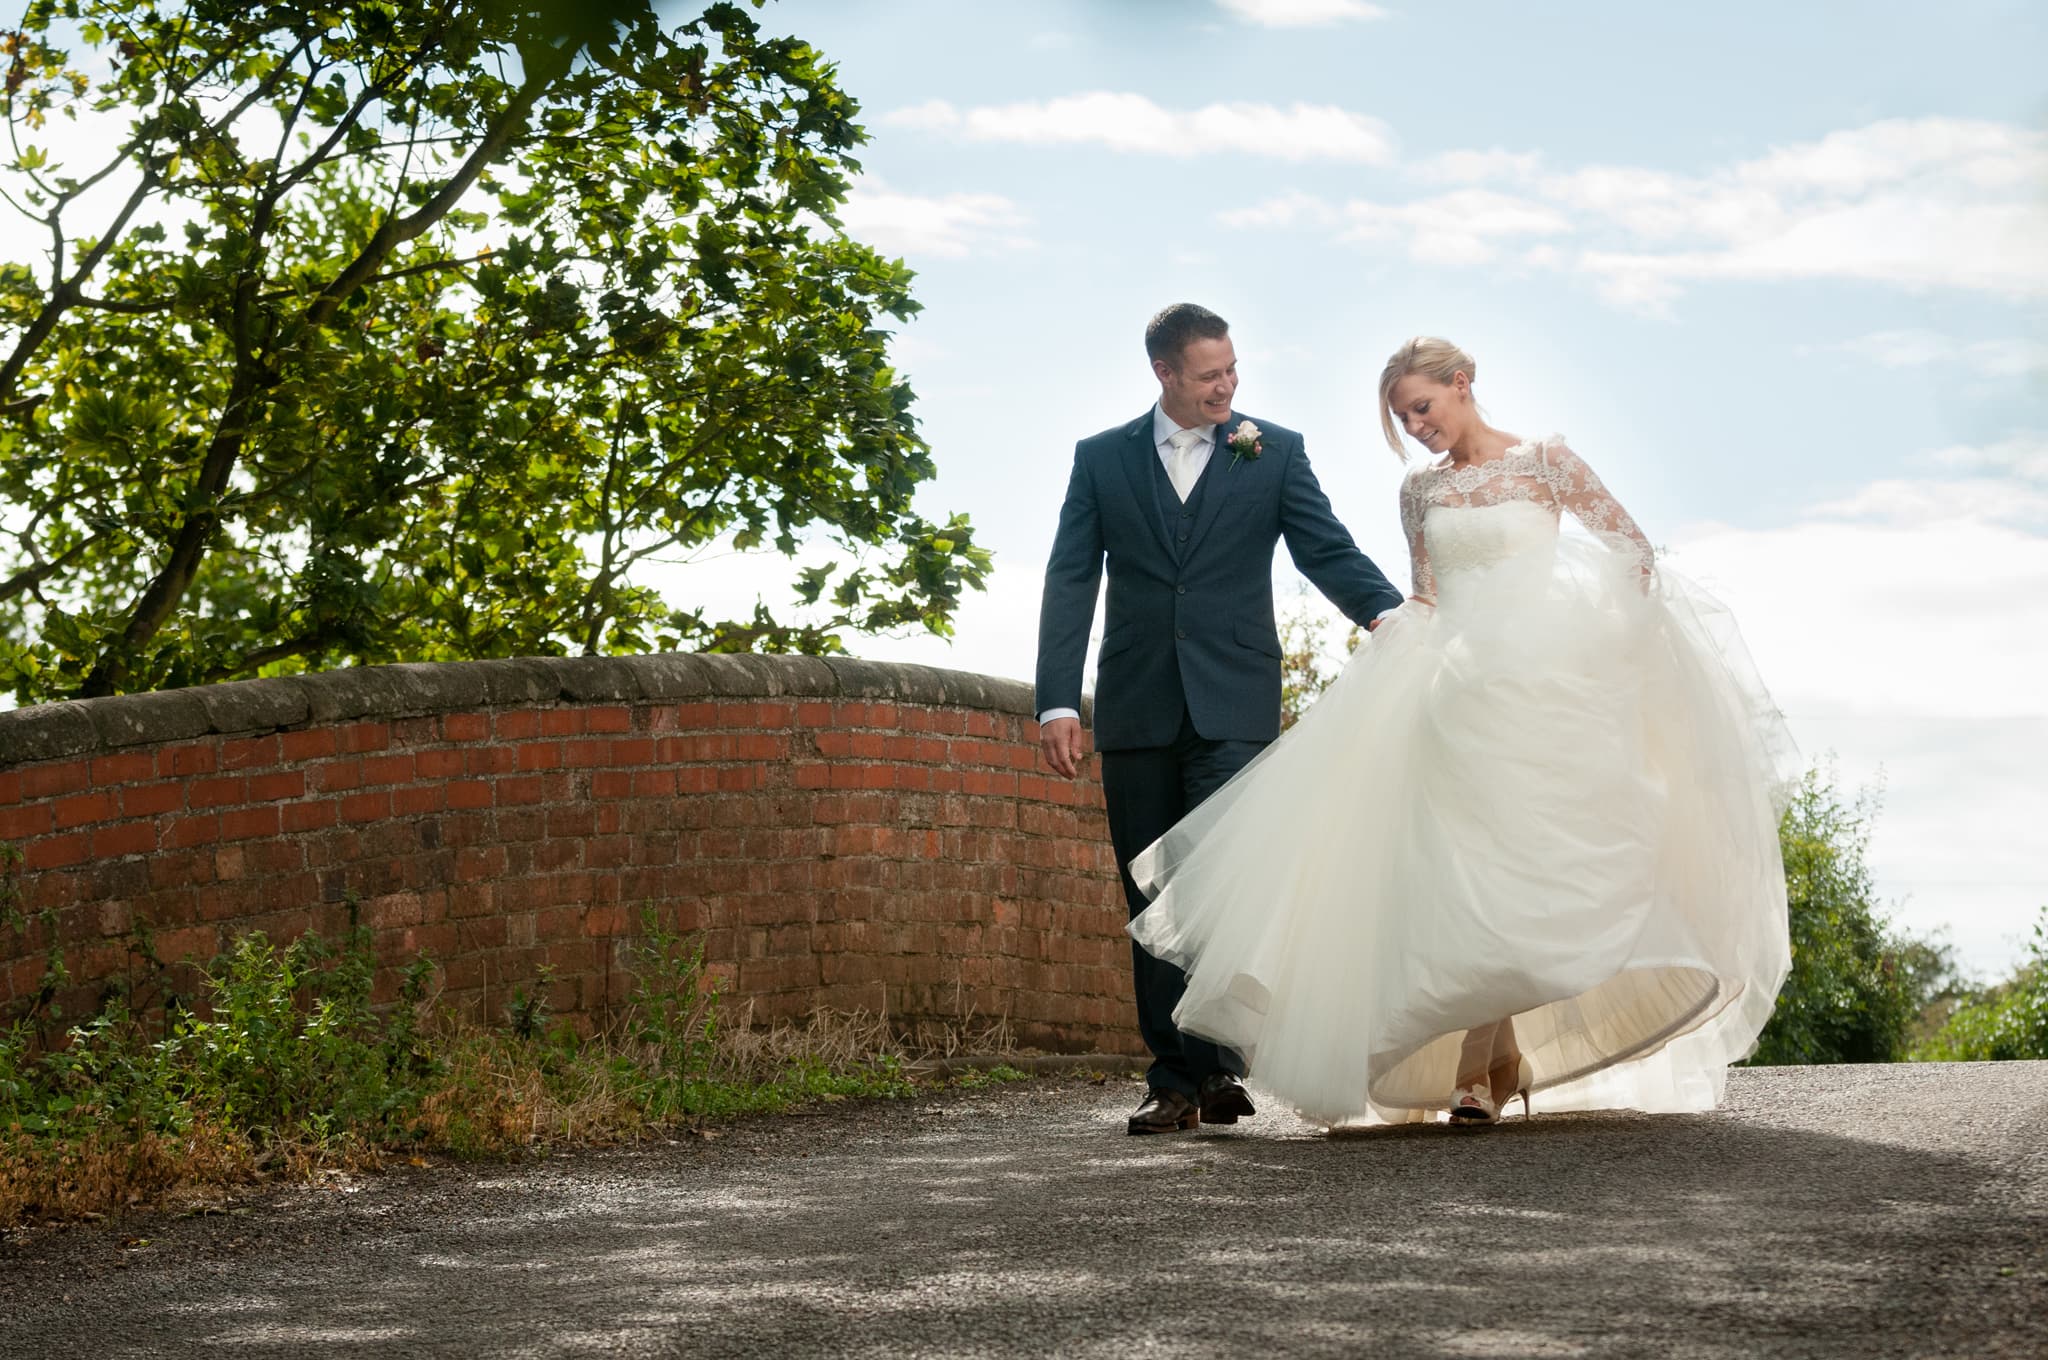 Groom helping the bride with her dress as they walk over a bridge with red brick walls outside Dodmoor House